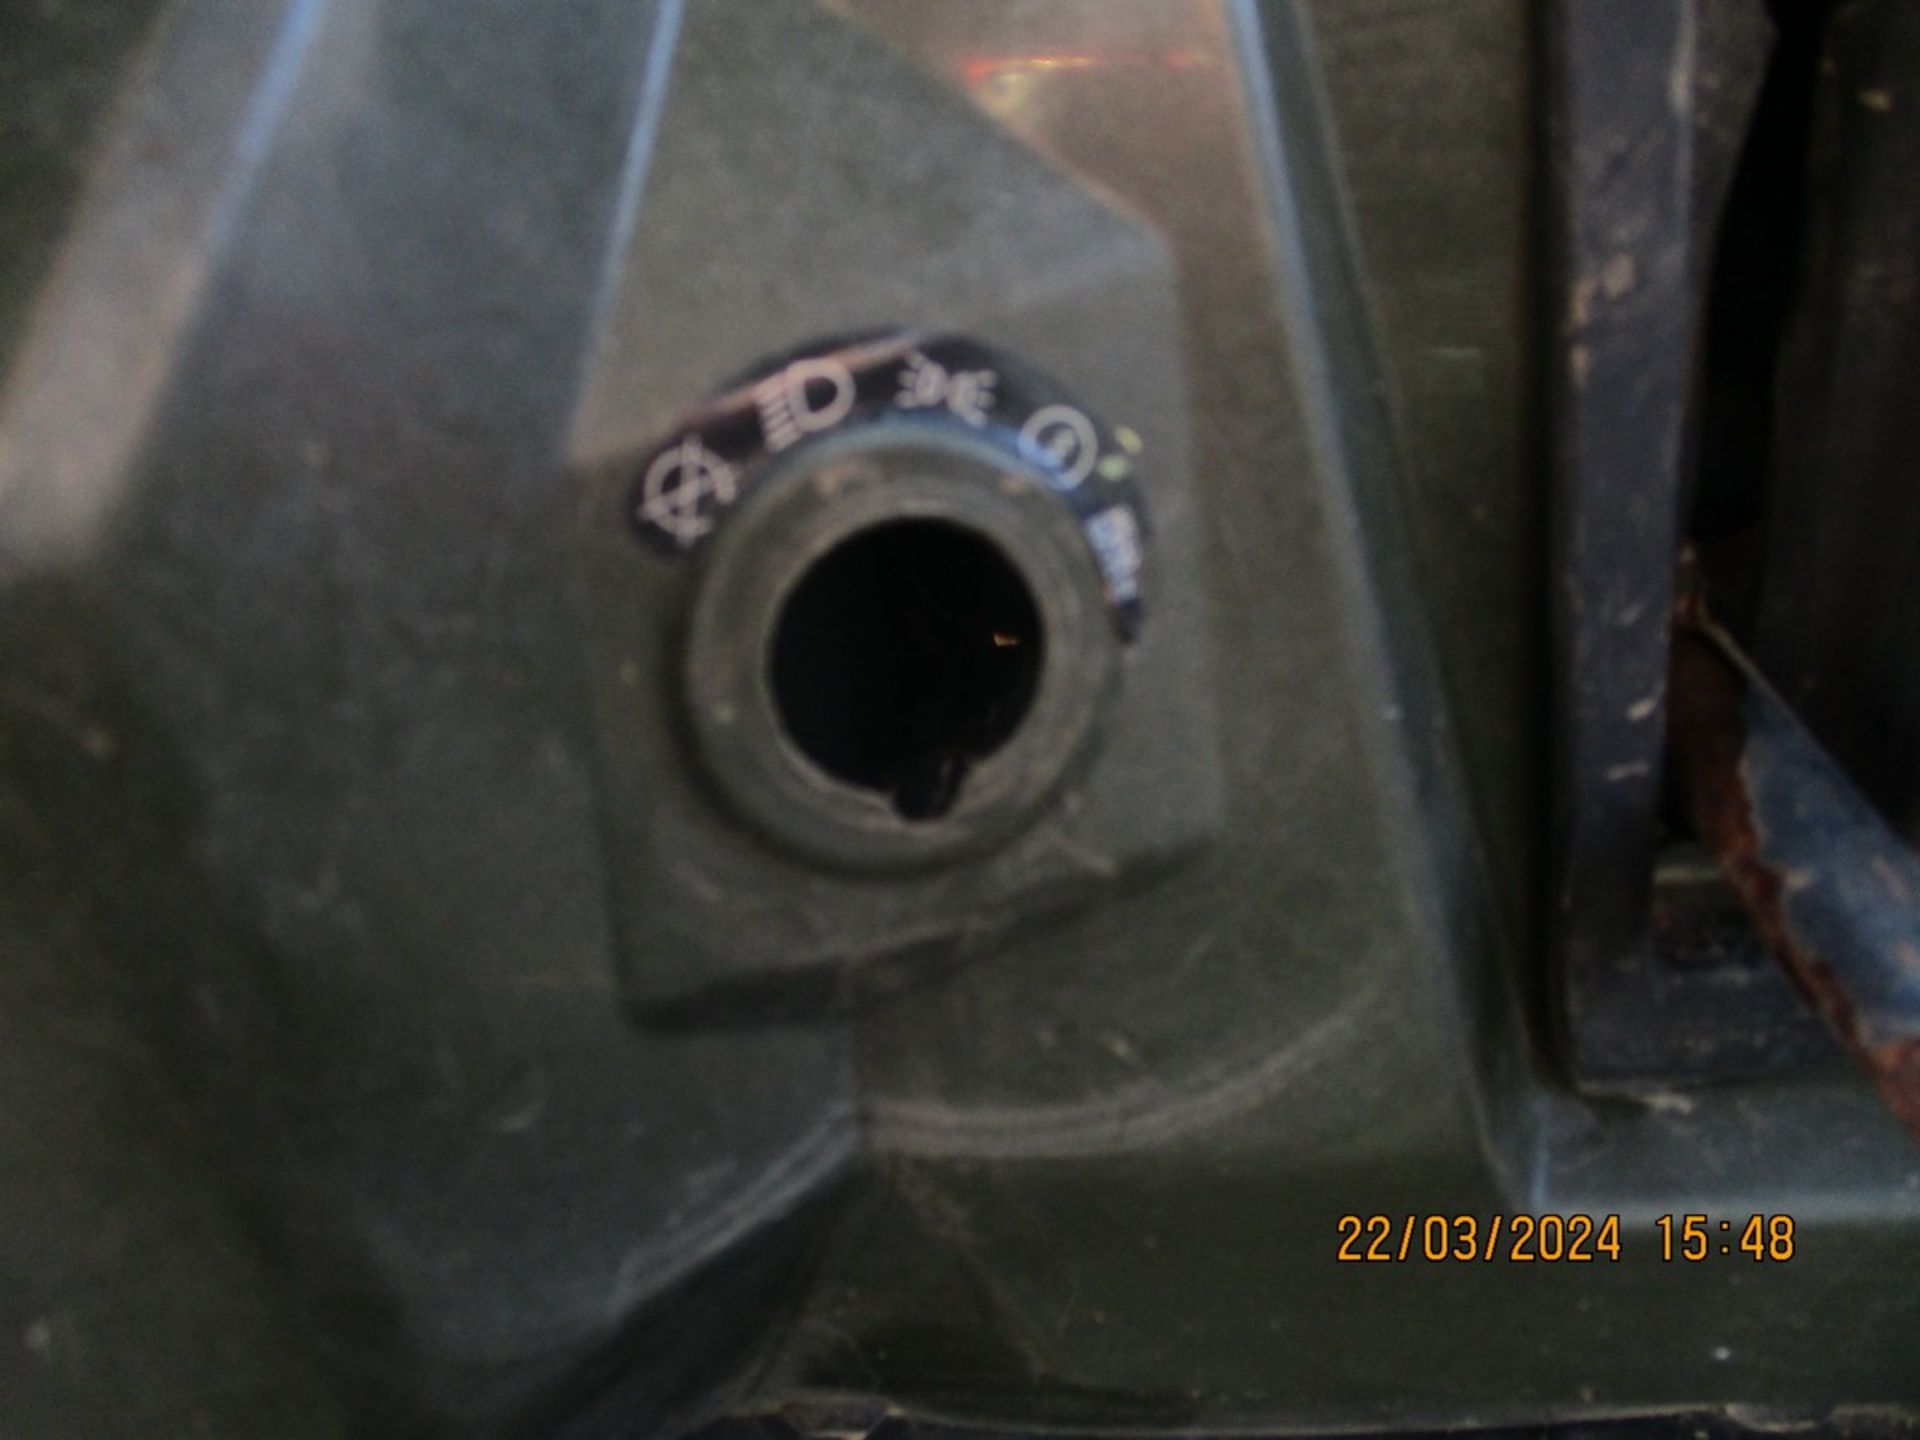 POLARIS RANGER DIESEL 2016 SHOWING 1458HRS, DROVE OFF TRAILER IGNITION NEEDS REPLACING - Image 8 of 9